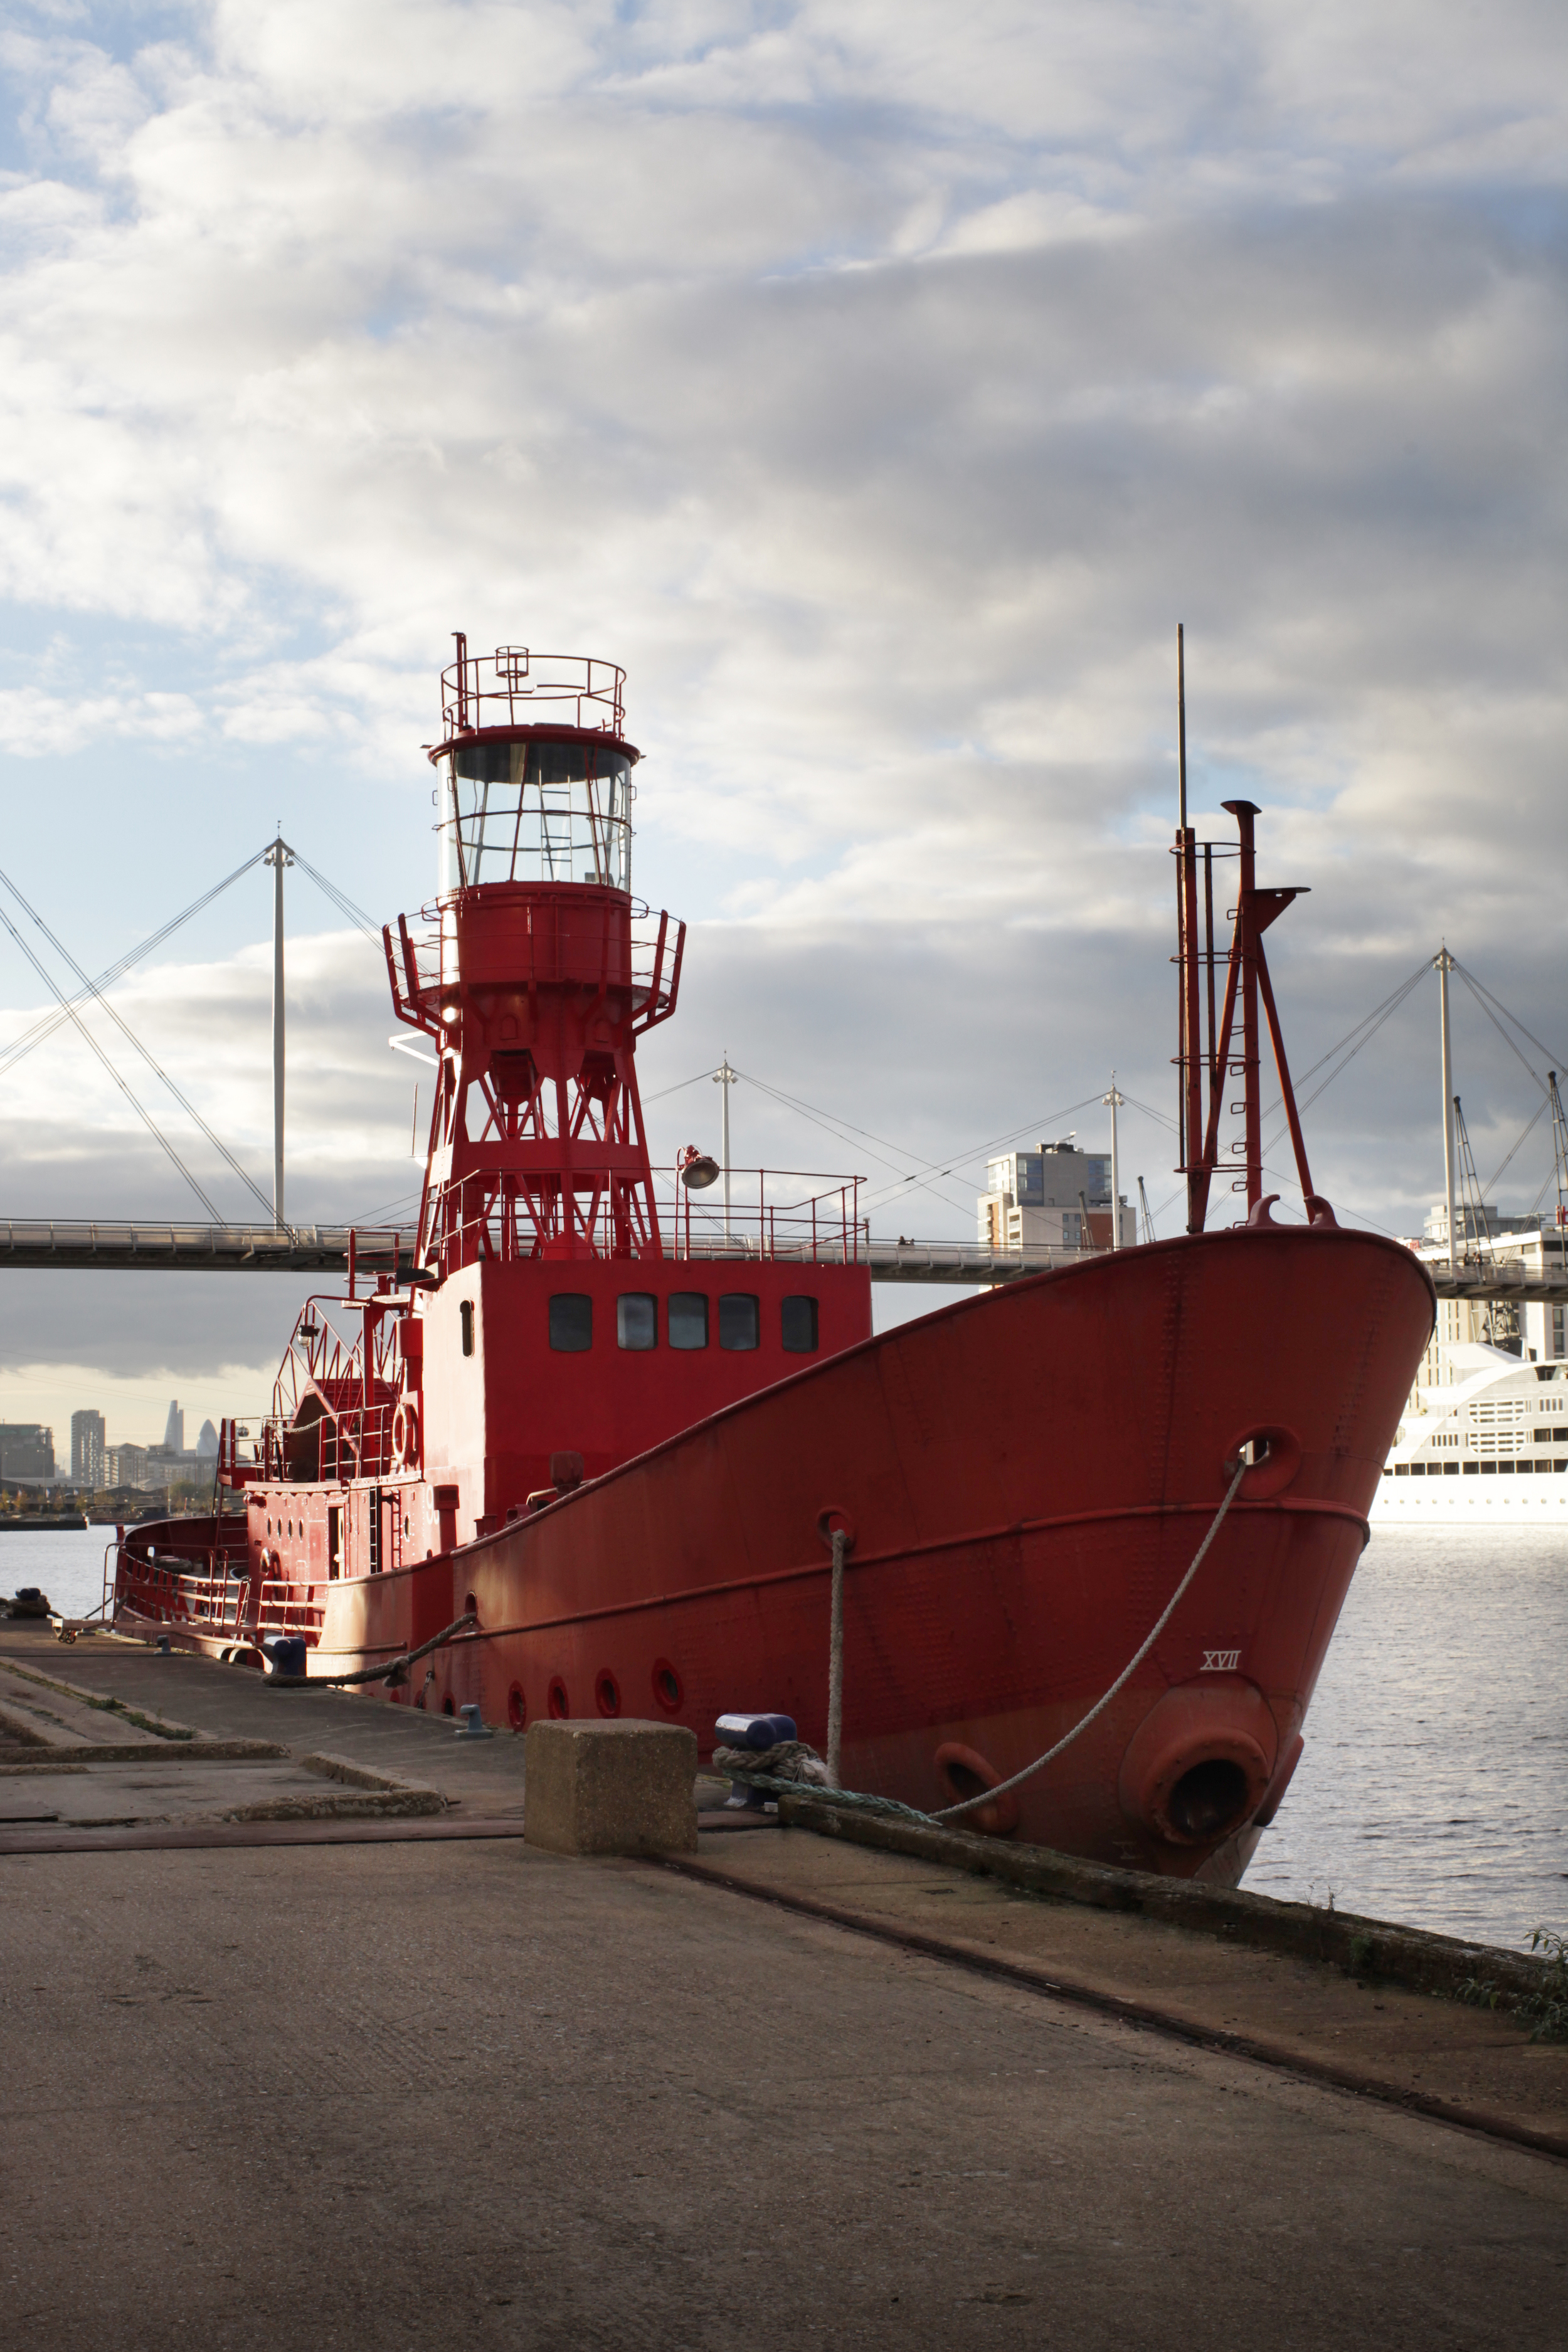 Red boat with lighthouse tower moored on the edge of the dock